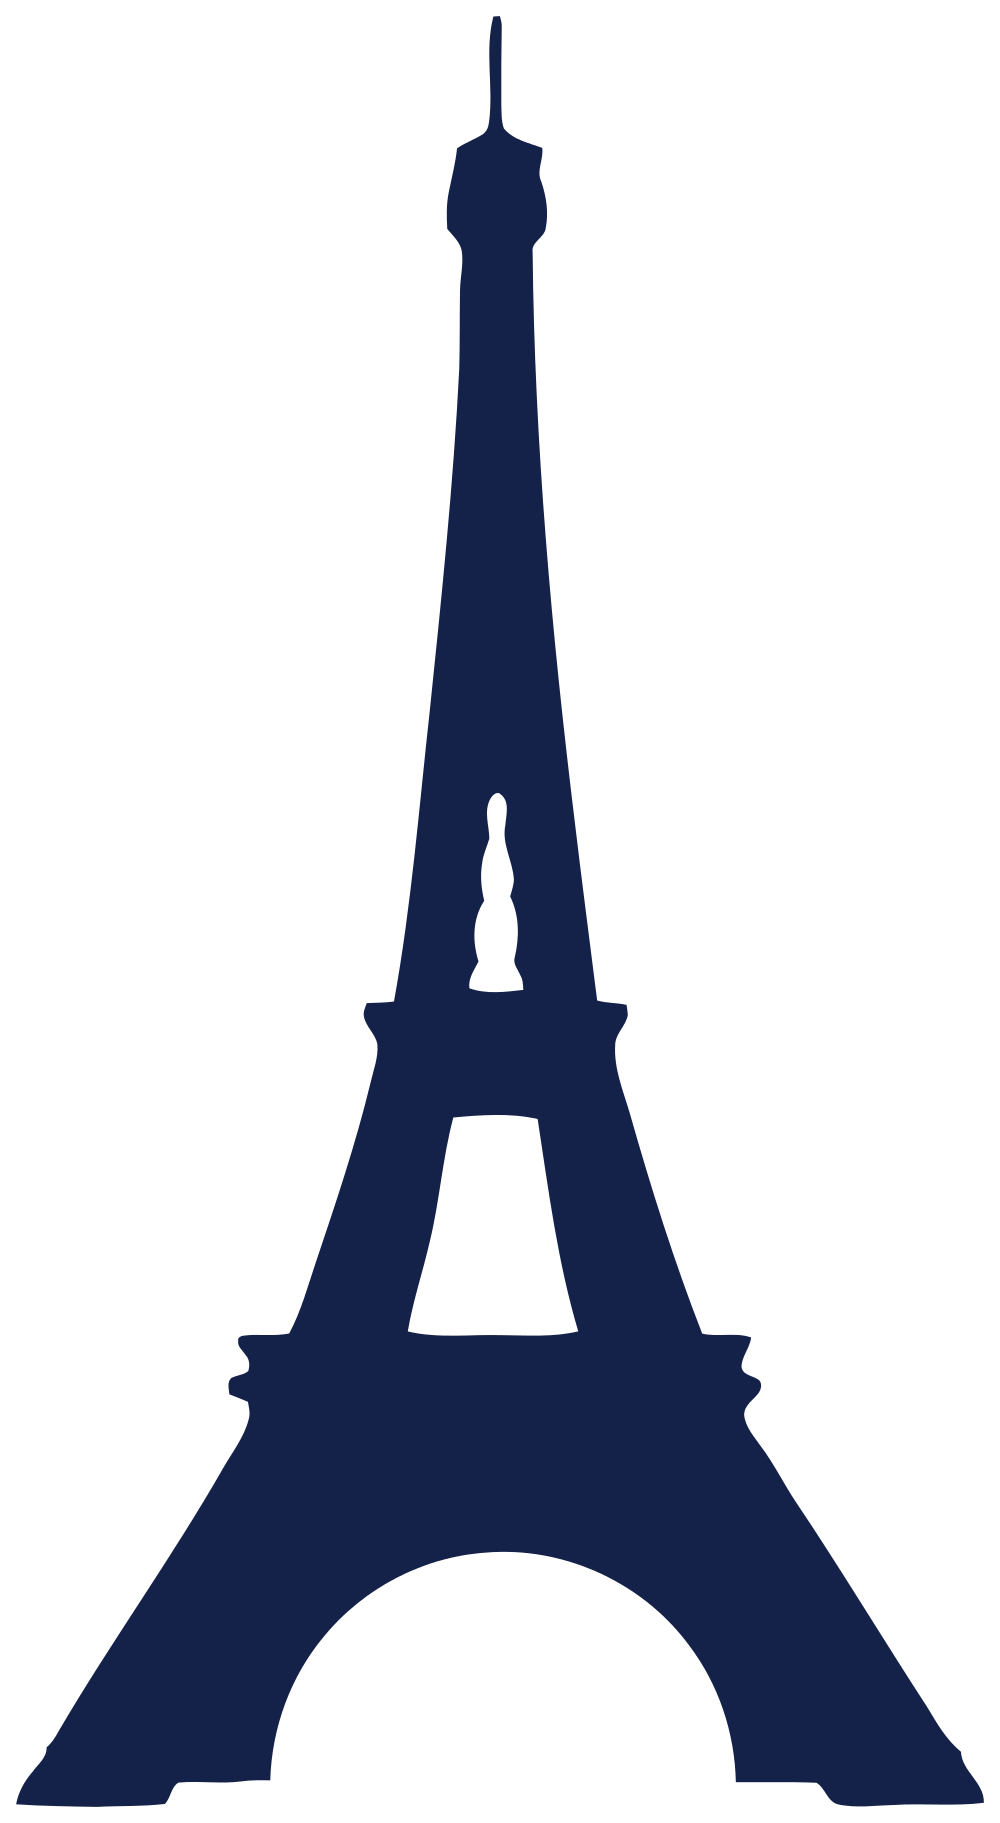 Paris clipart svg. Eiffel silhouette at getdrawings